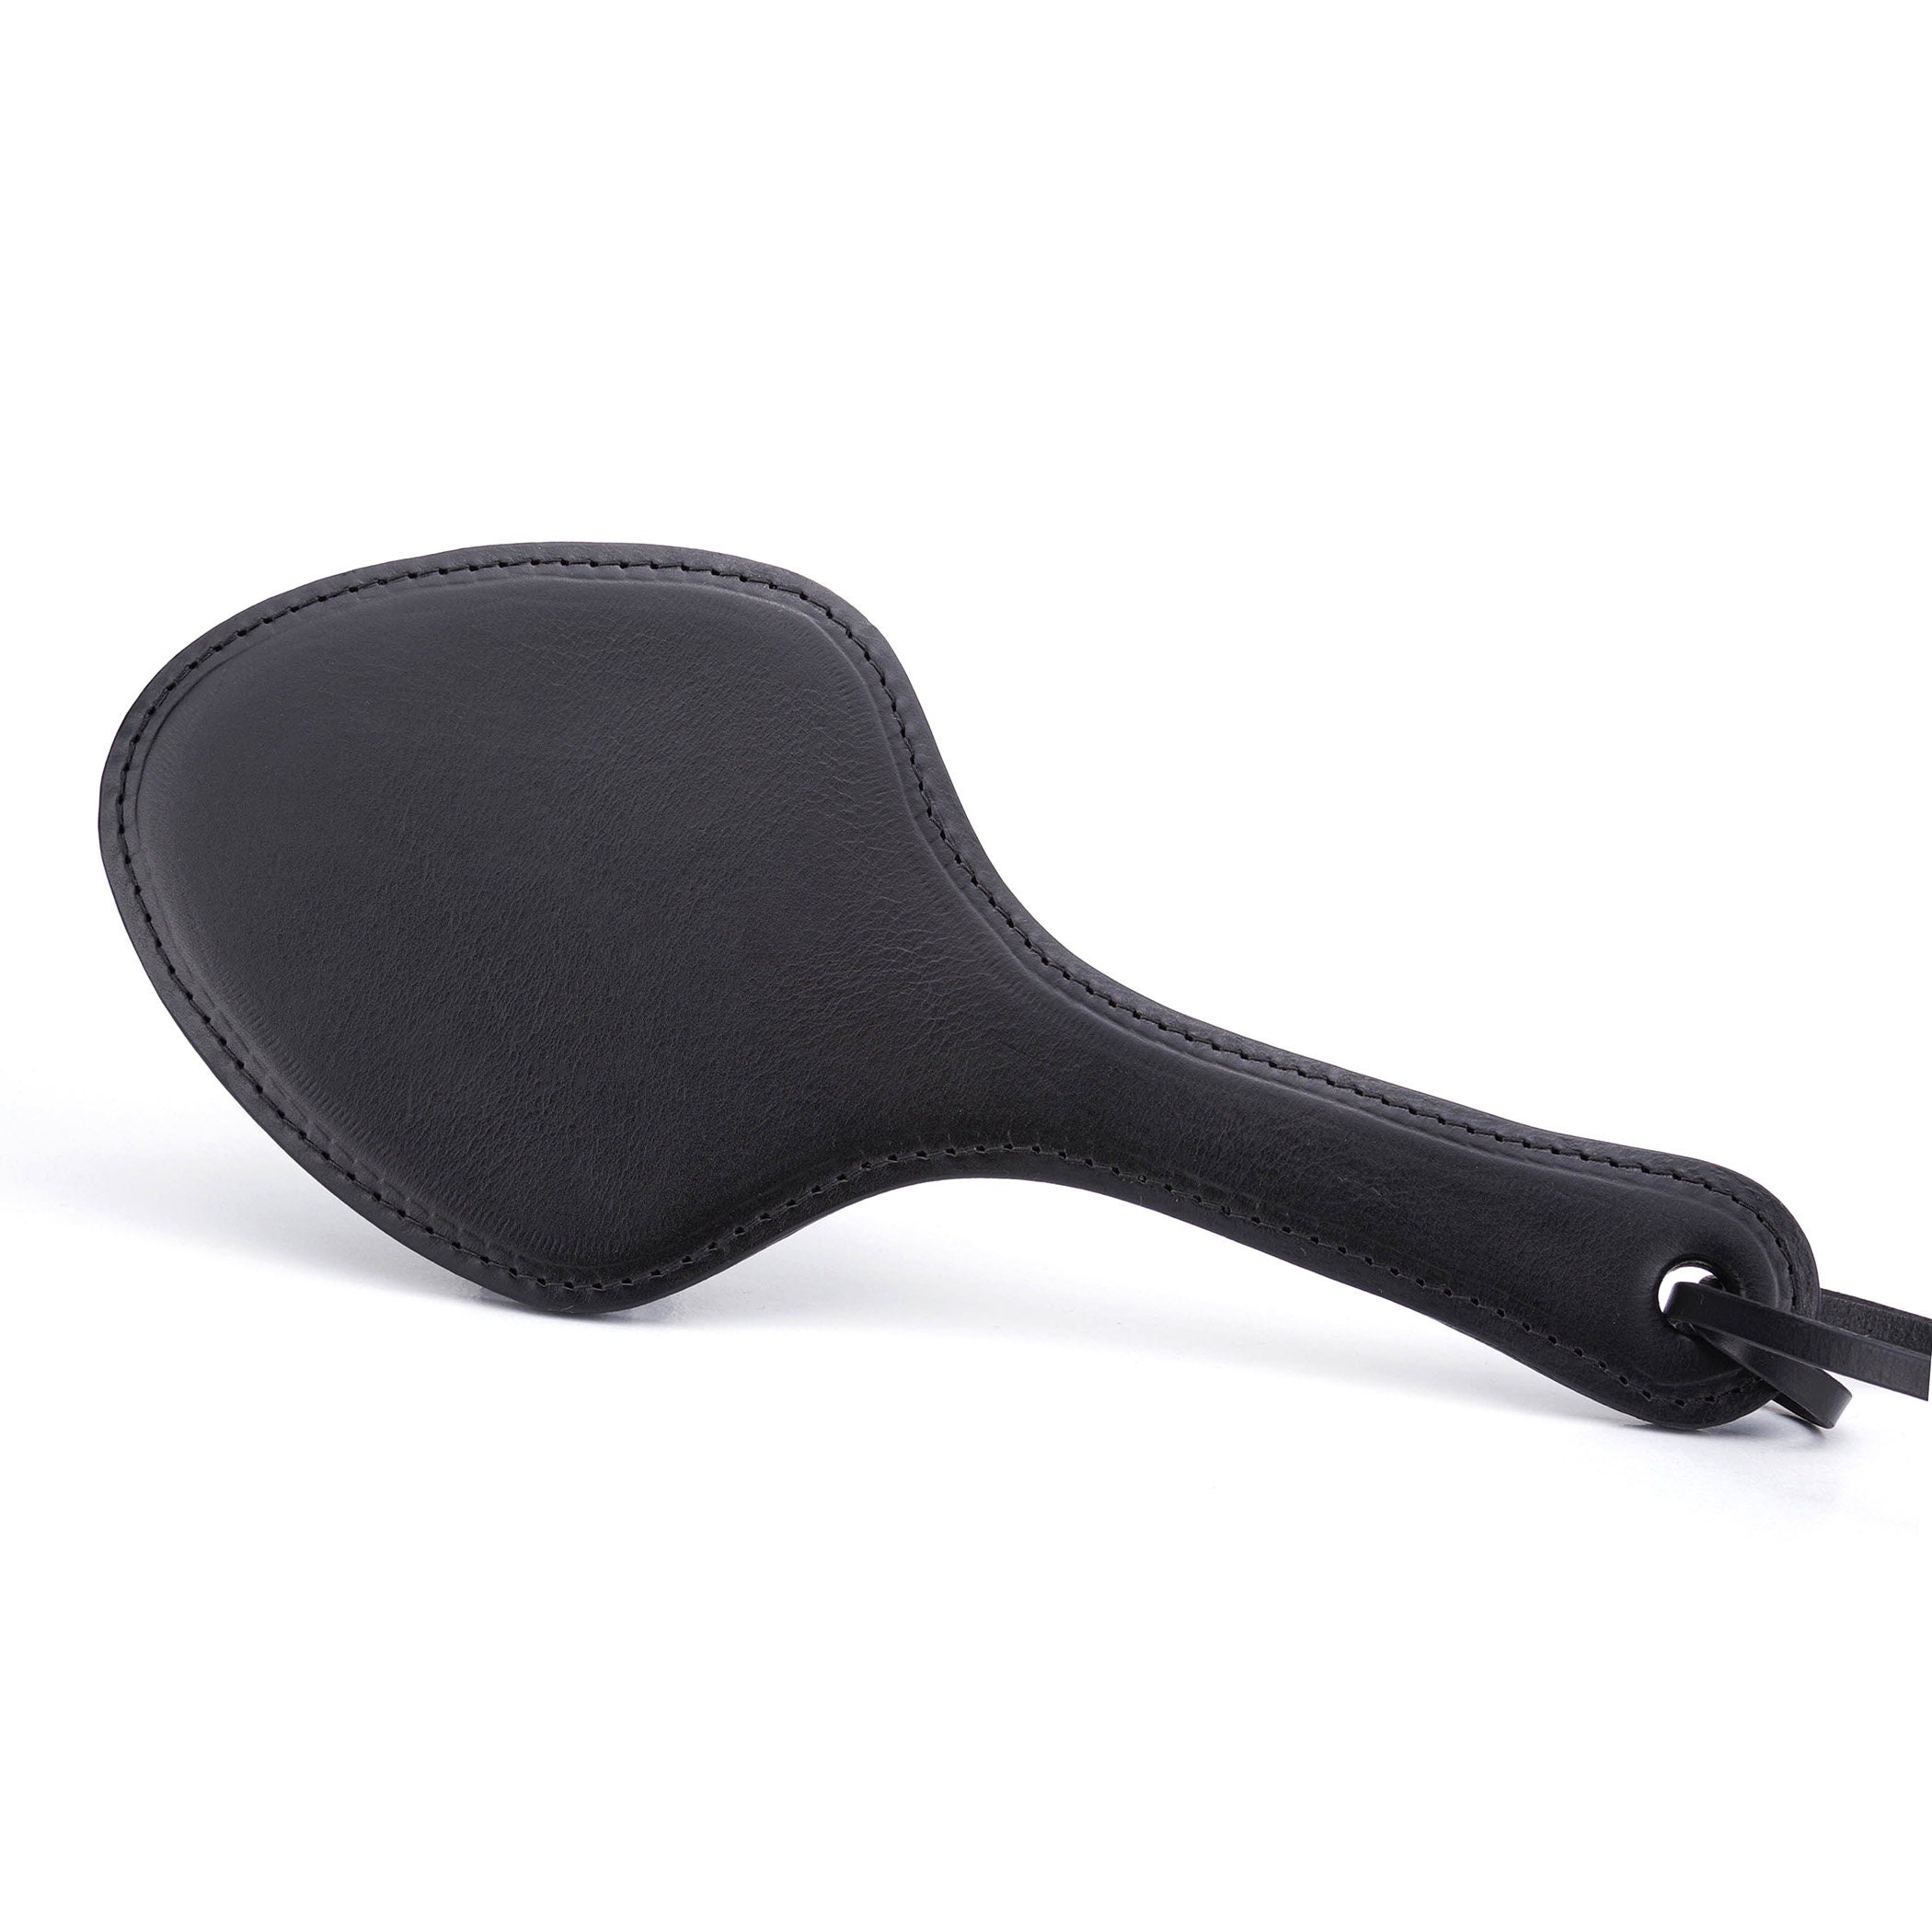 Best Vegan Leather BDSM Paddle: High-Quality And Waterproof